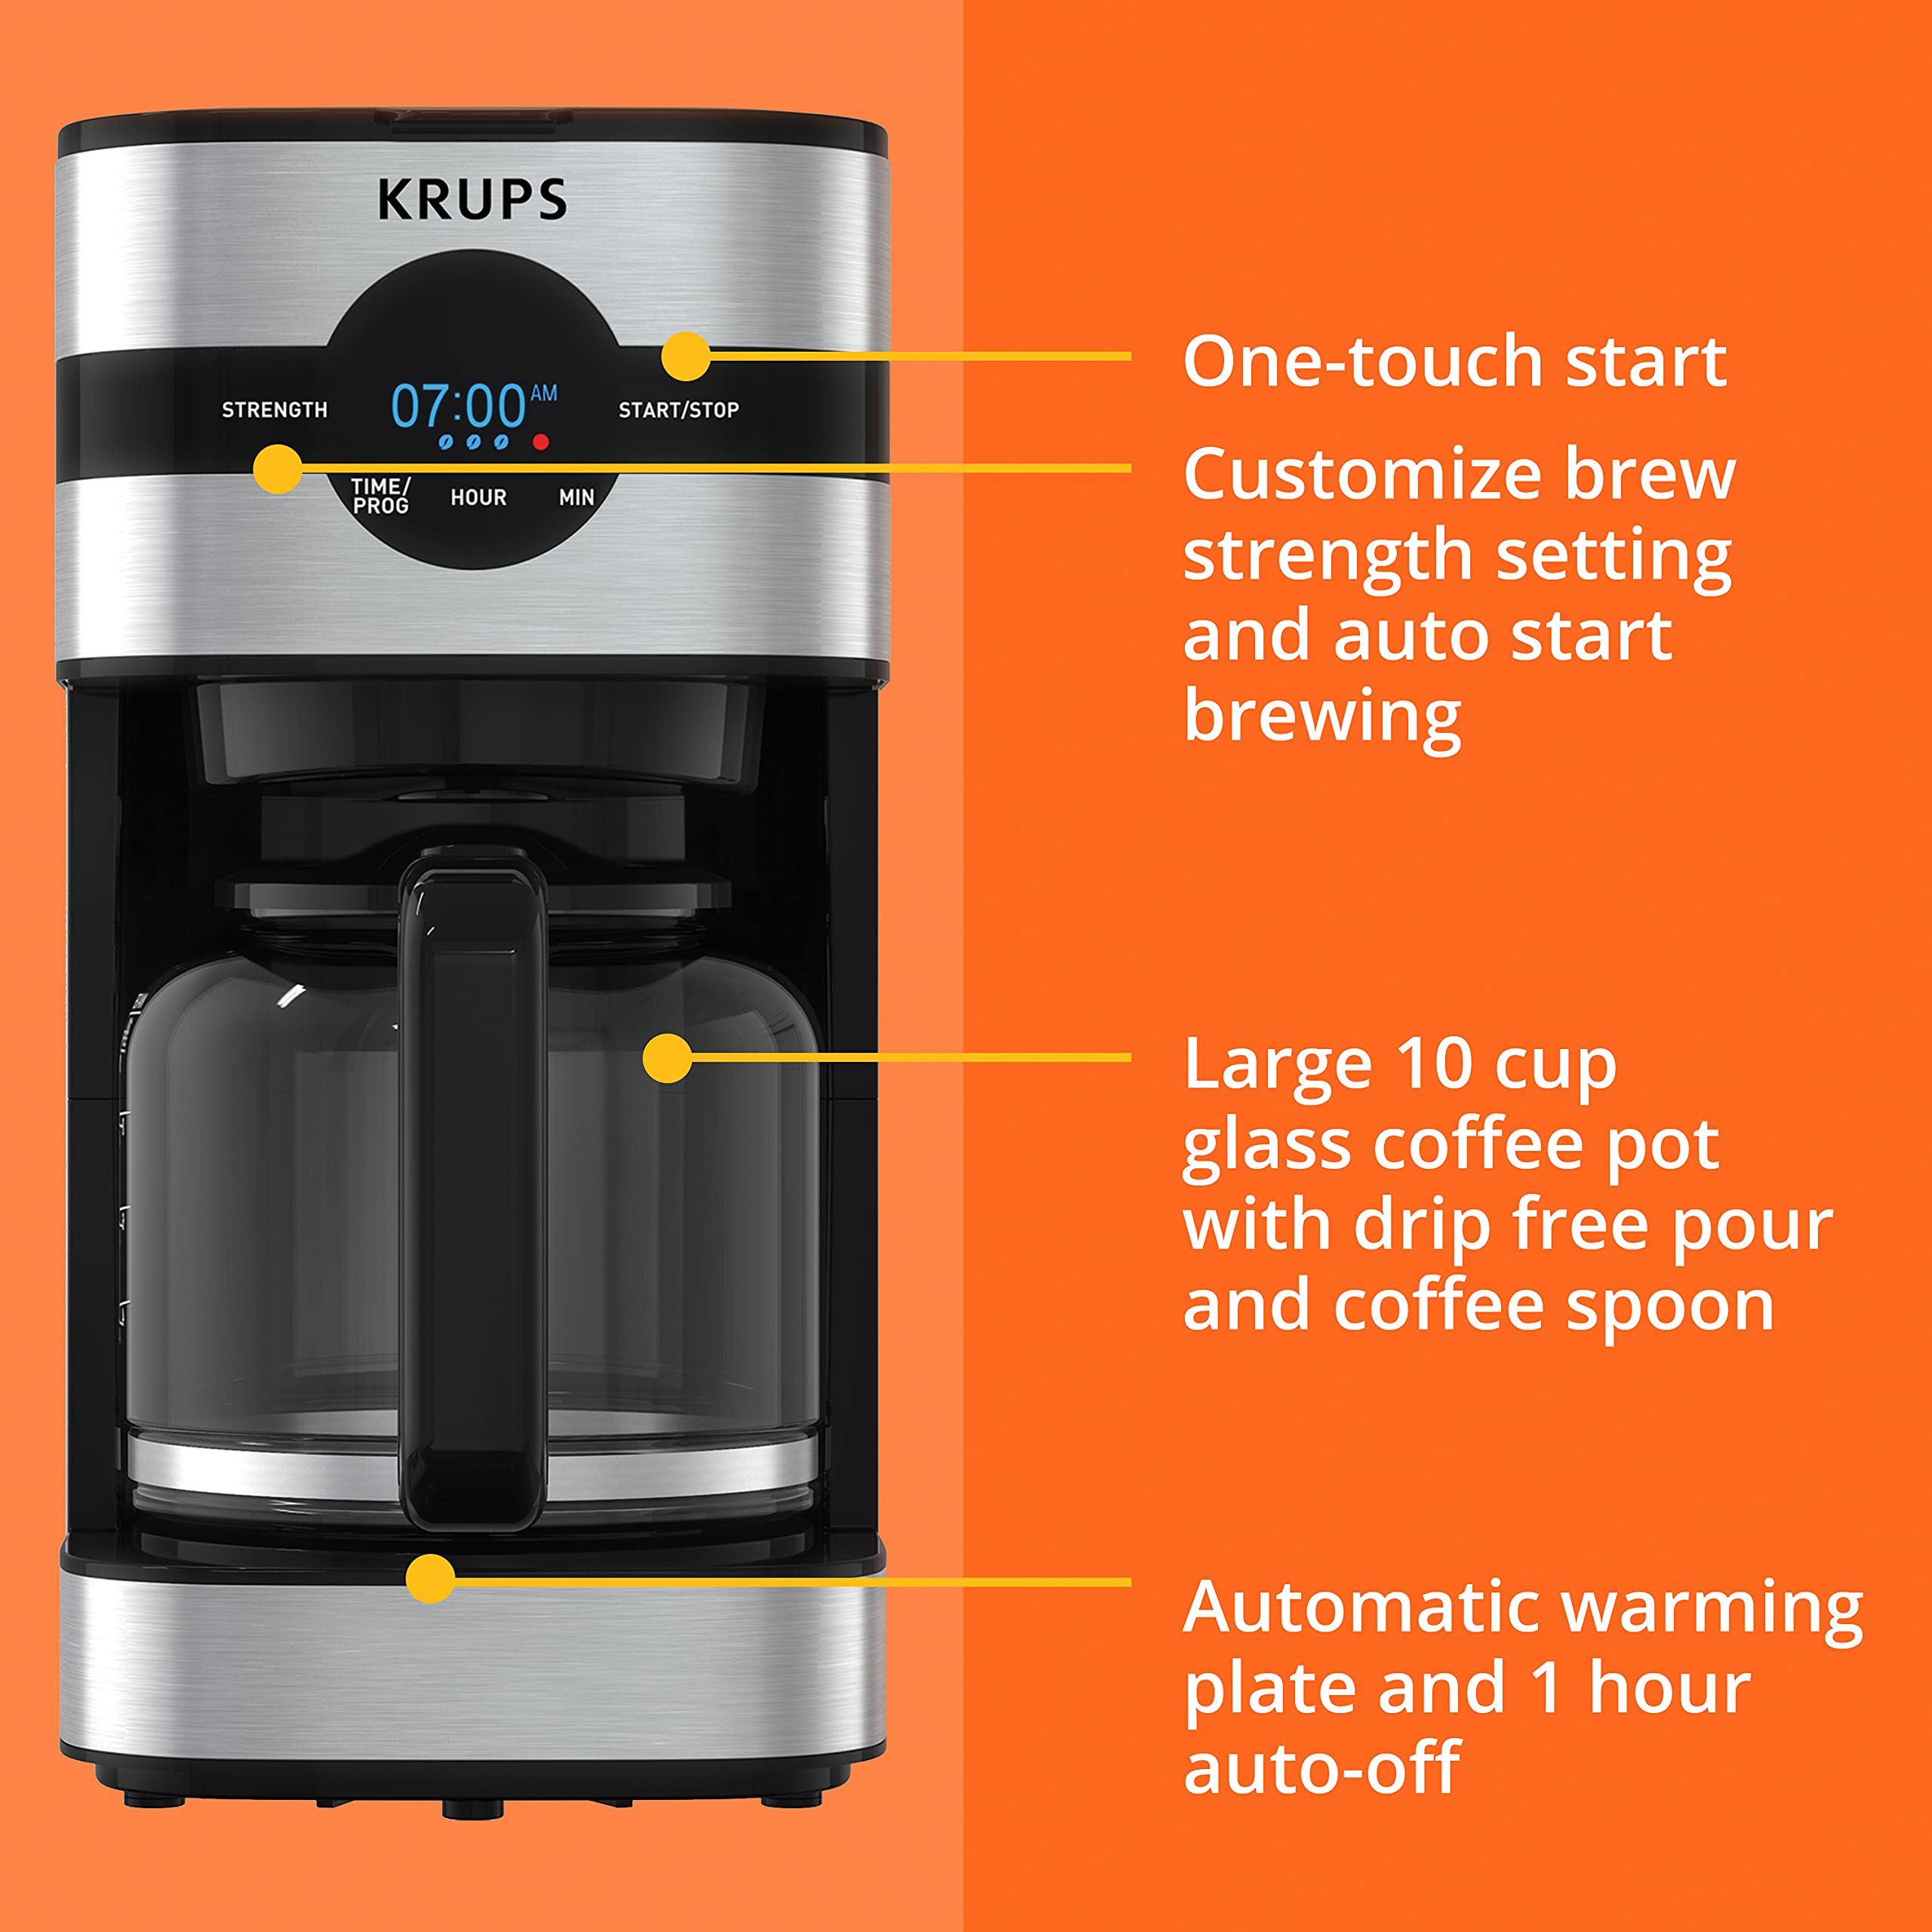 Krups Simply Brew Stainless Steel Drip Coffee Maker 10 Cup 900 Watts Digital Control, Coffee Filter, Drip Free, Dishwasher Safe Pot Silver and Black